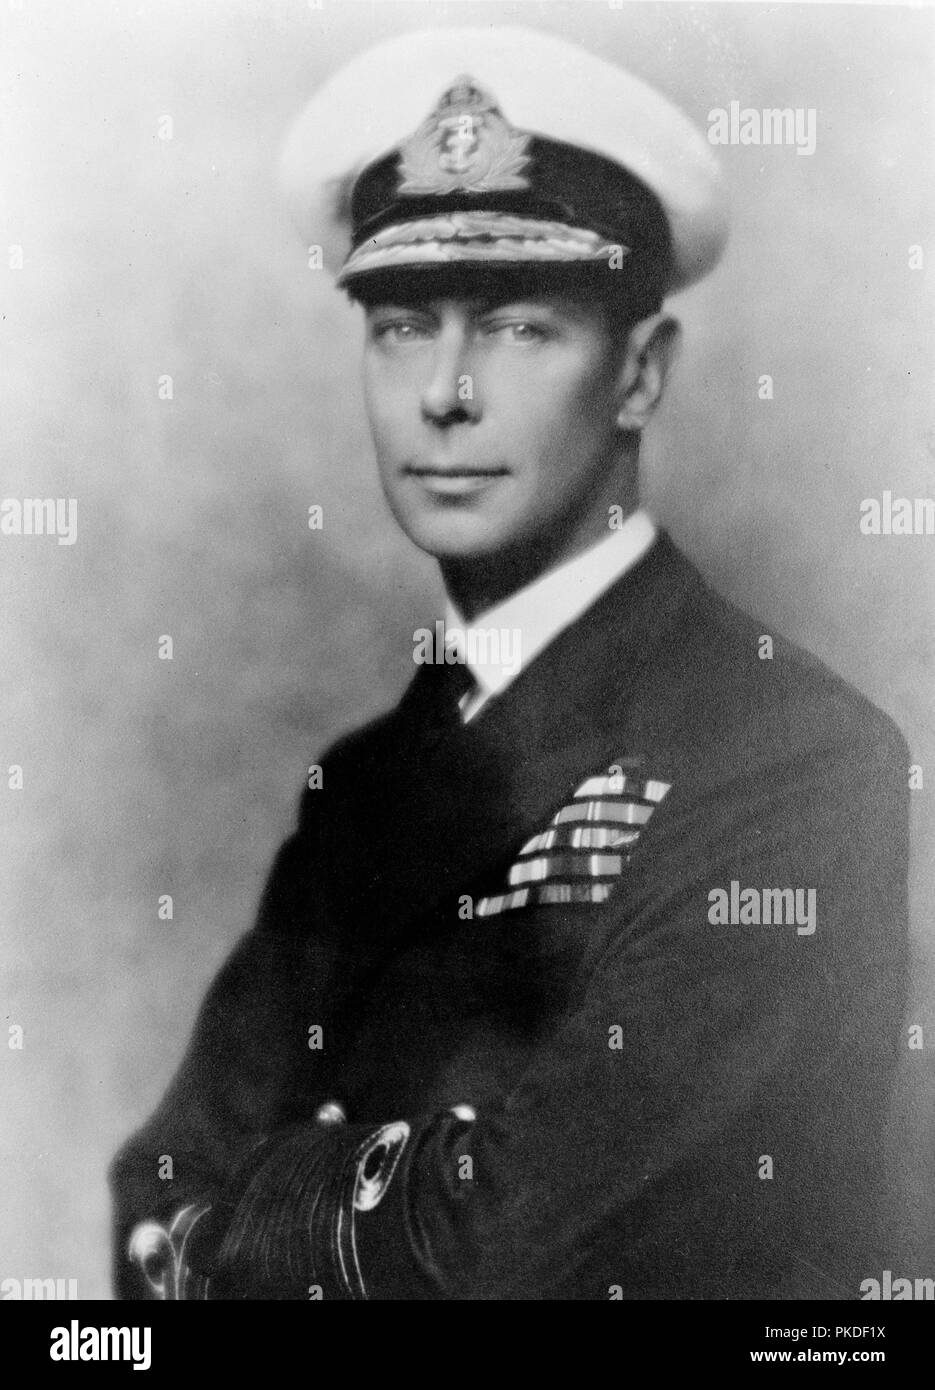 King George VI of Great Britain Stock Photo